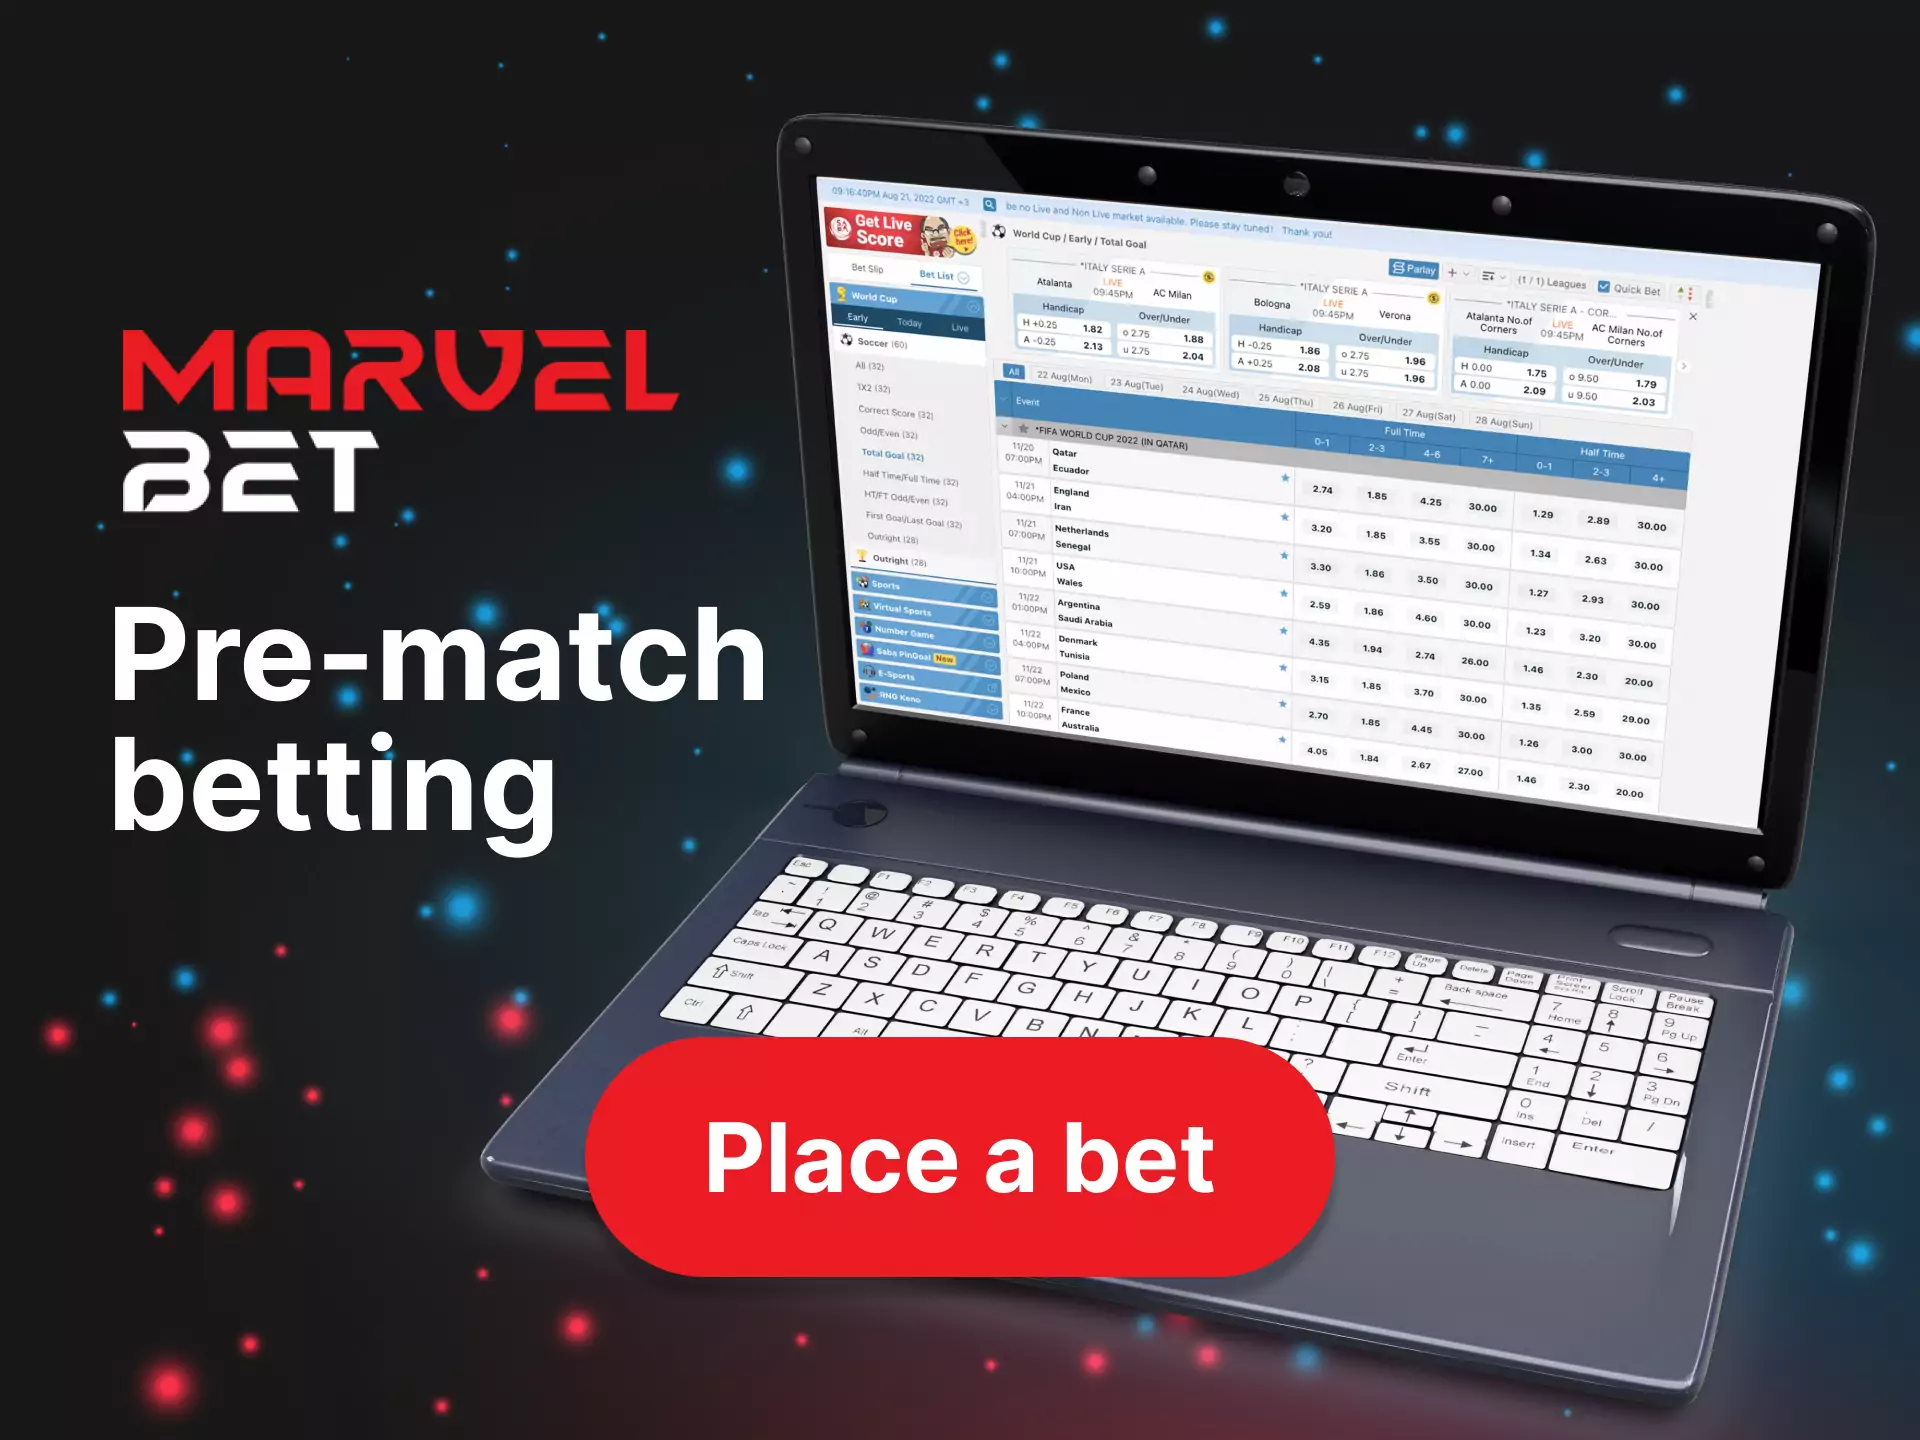 On the Marvelbet website, you can place bets beforehand.